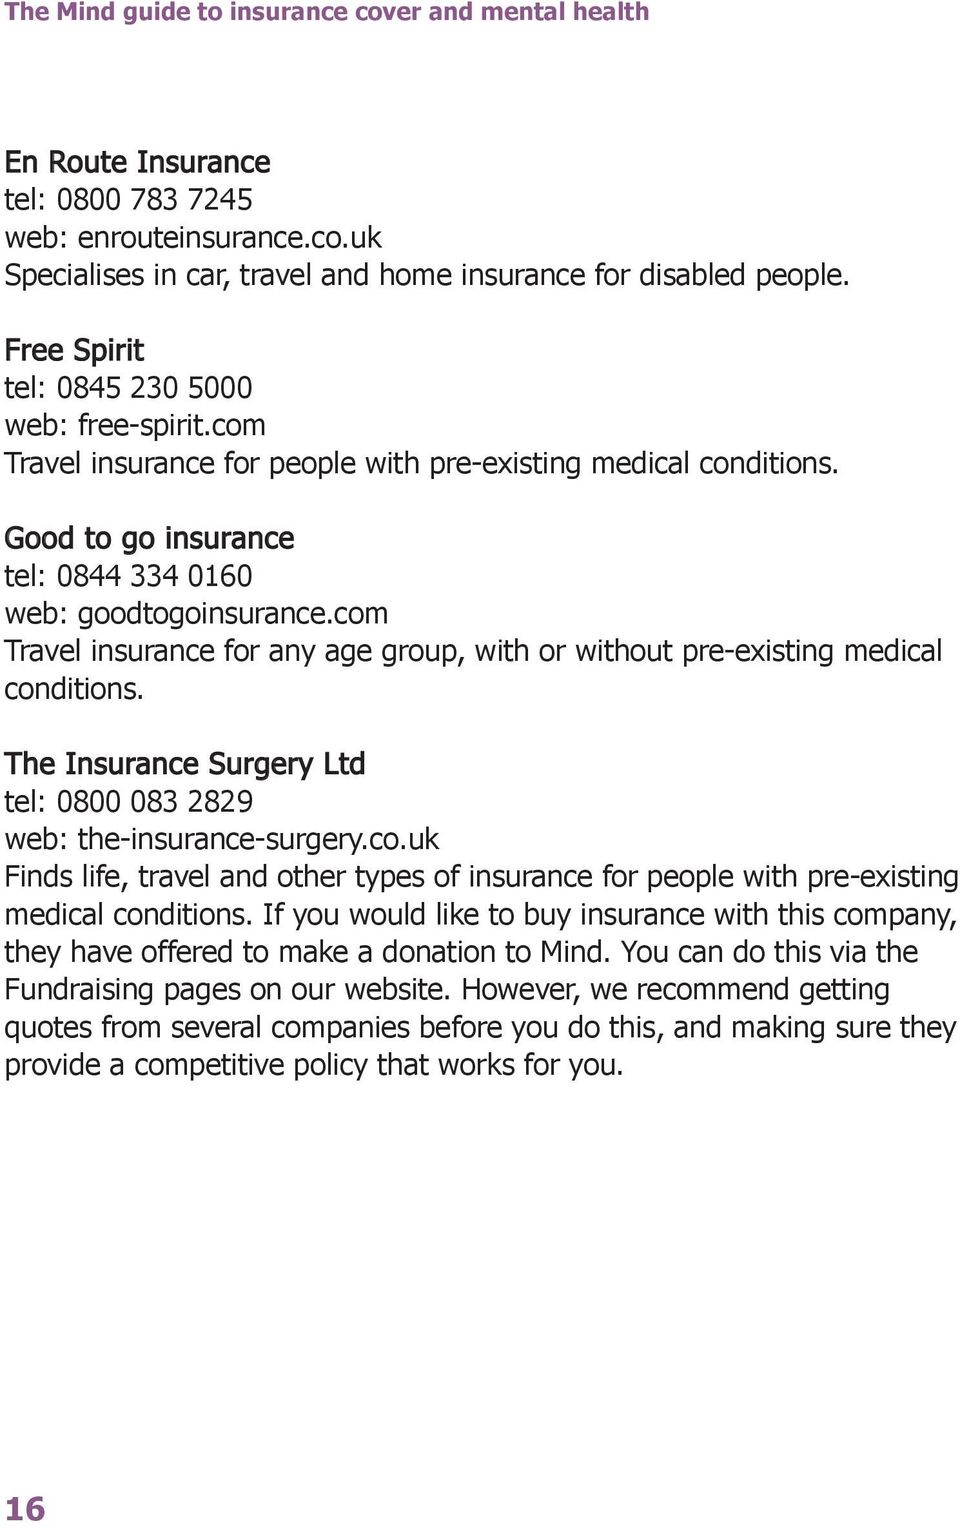 com Travel insurance for any age group, with or without pre-existing medical conditions. The Insurance Surgery Ltd tel: 0800 083 2829 web: the-insurance-surgery.co.uk Finds life, travel and other types of insurance for people with pre-existing medical conditions.